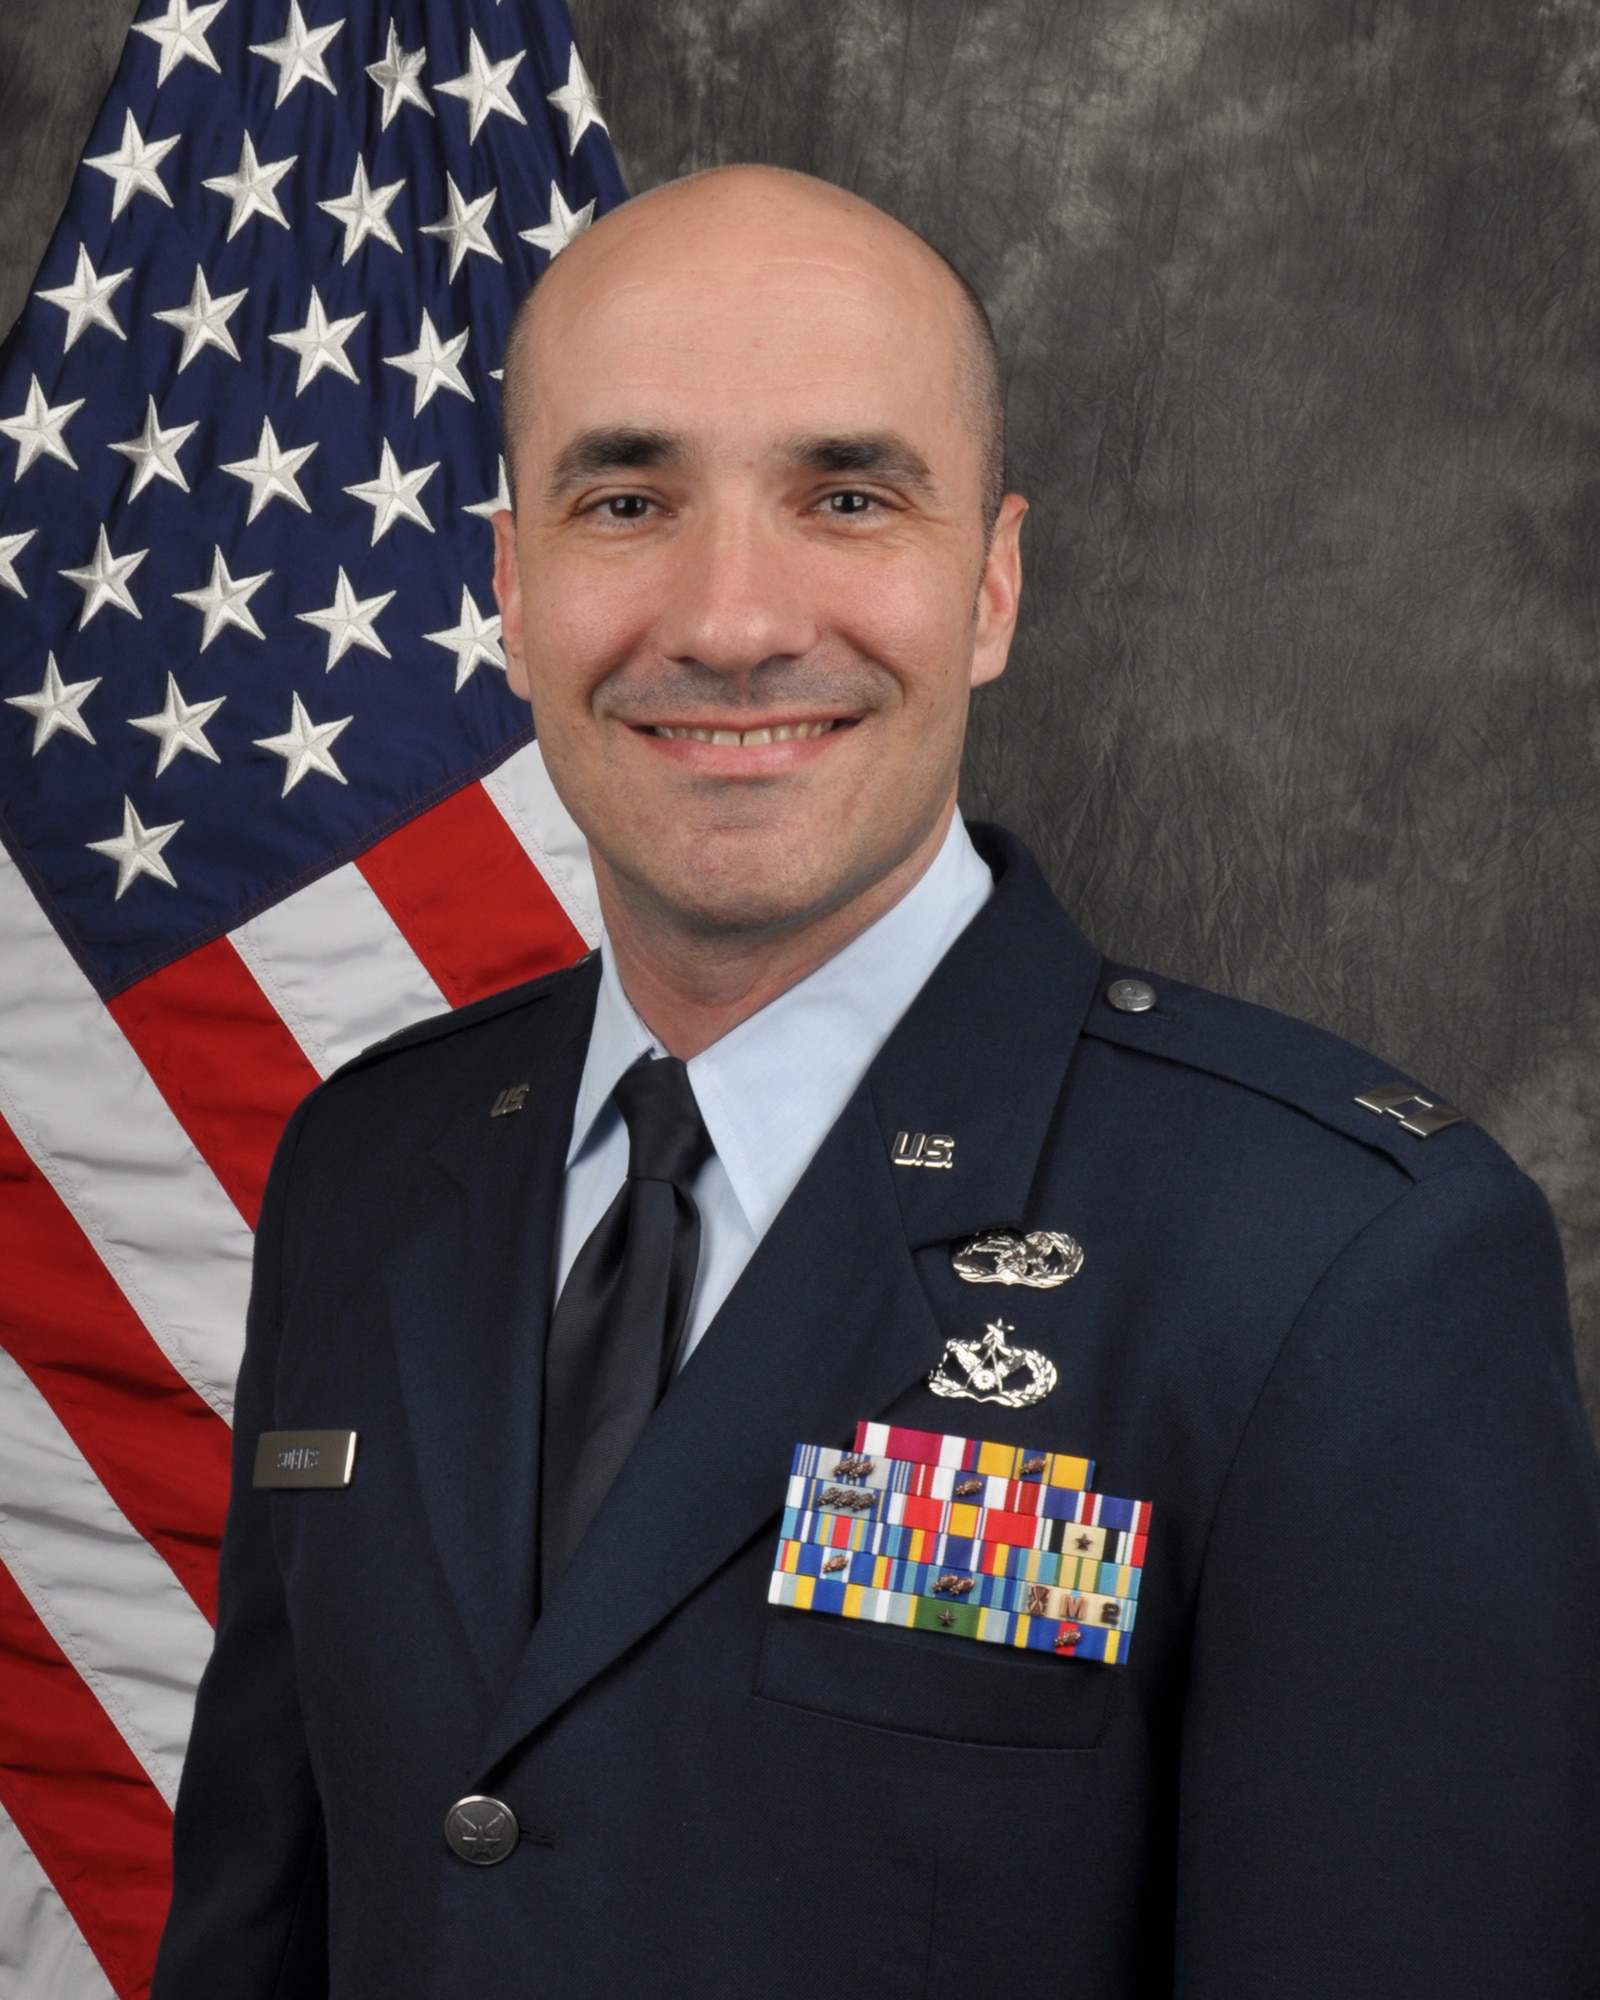 Capt. Phillip Sobers, 445th Logistics Readiness Squadron, deputy director of operations, has been nominated by Air Force Reserve Command for the 2019 Reserve Officers Association Outstanding Junior Officer of the Year. Sobers was selected as a nominee for his accomplishments beginning October 1, 2017 through September 30, 2018.